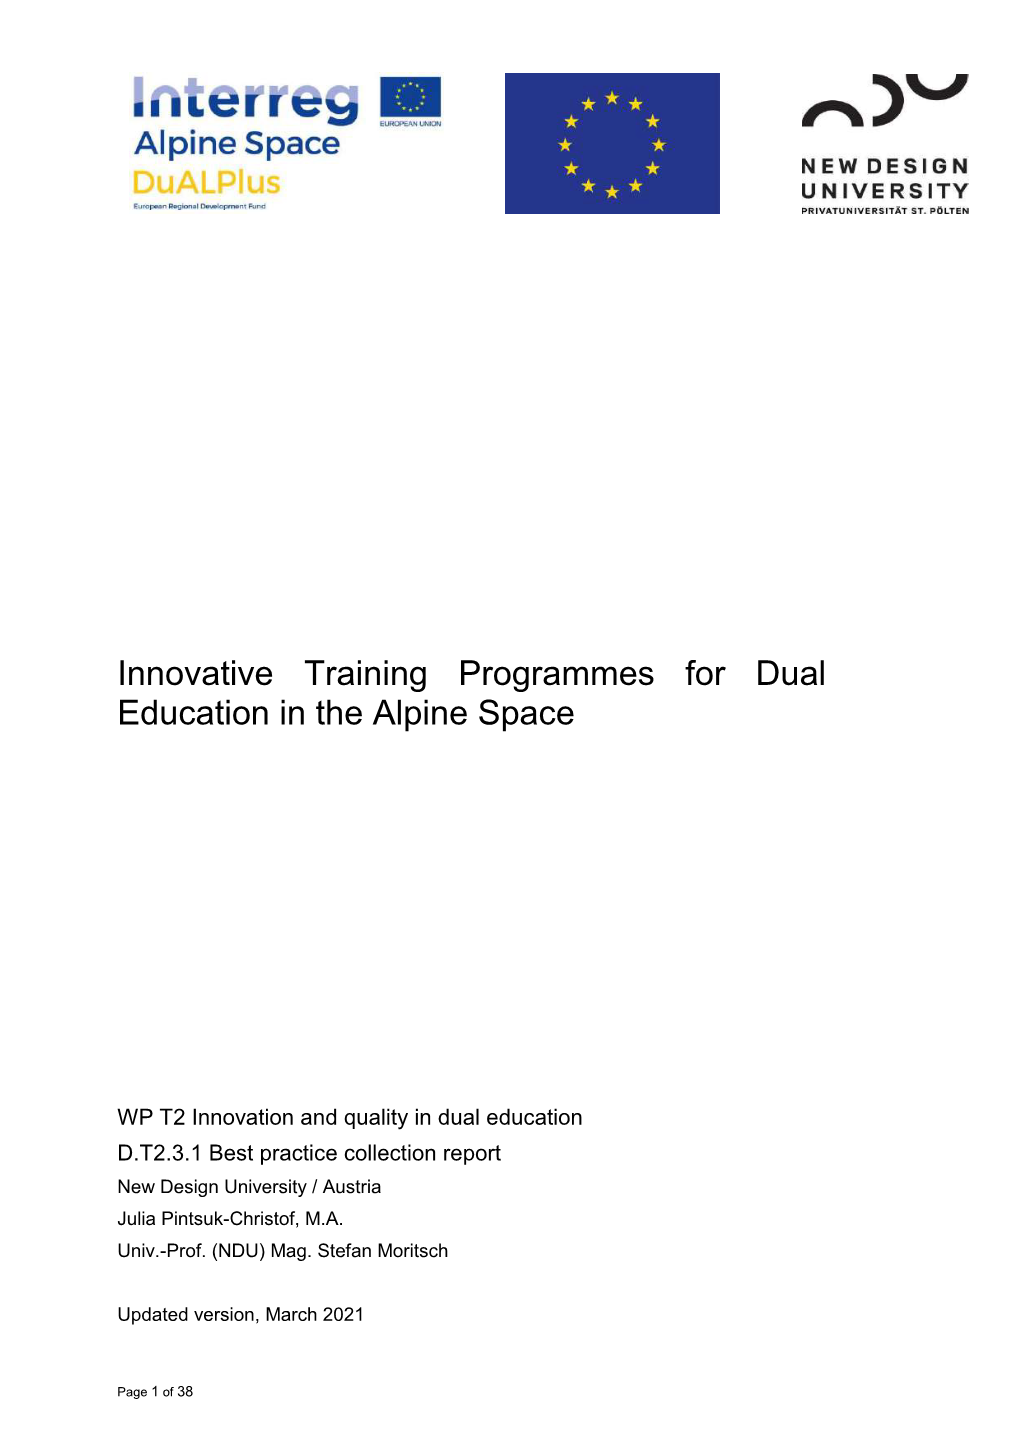 Innovative Training Programmes for Dual Education in the Alpine Space